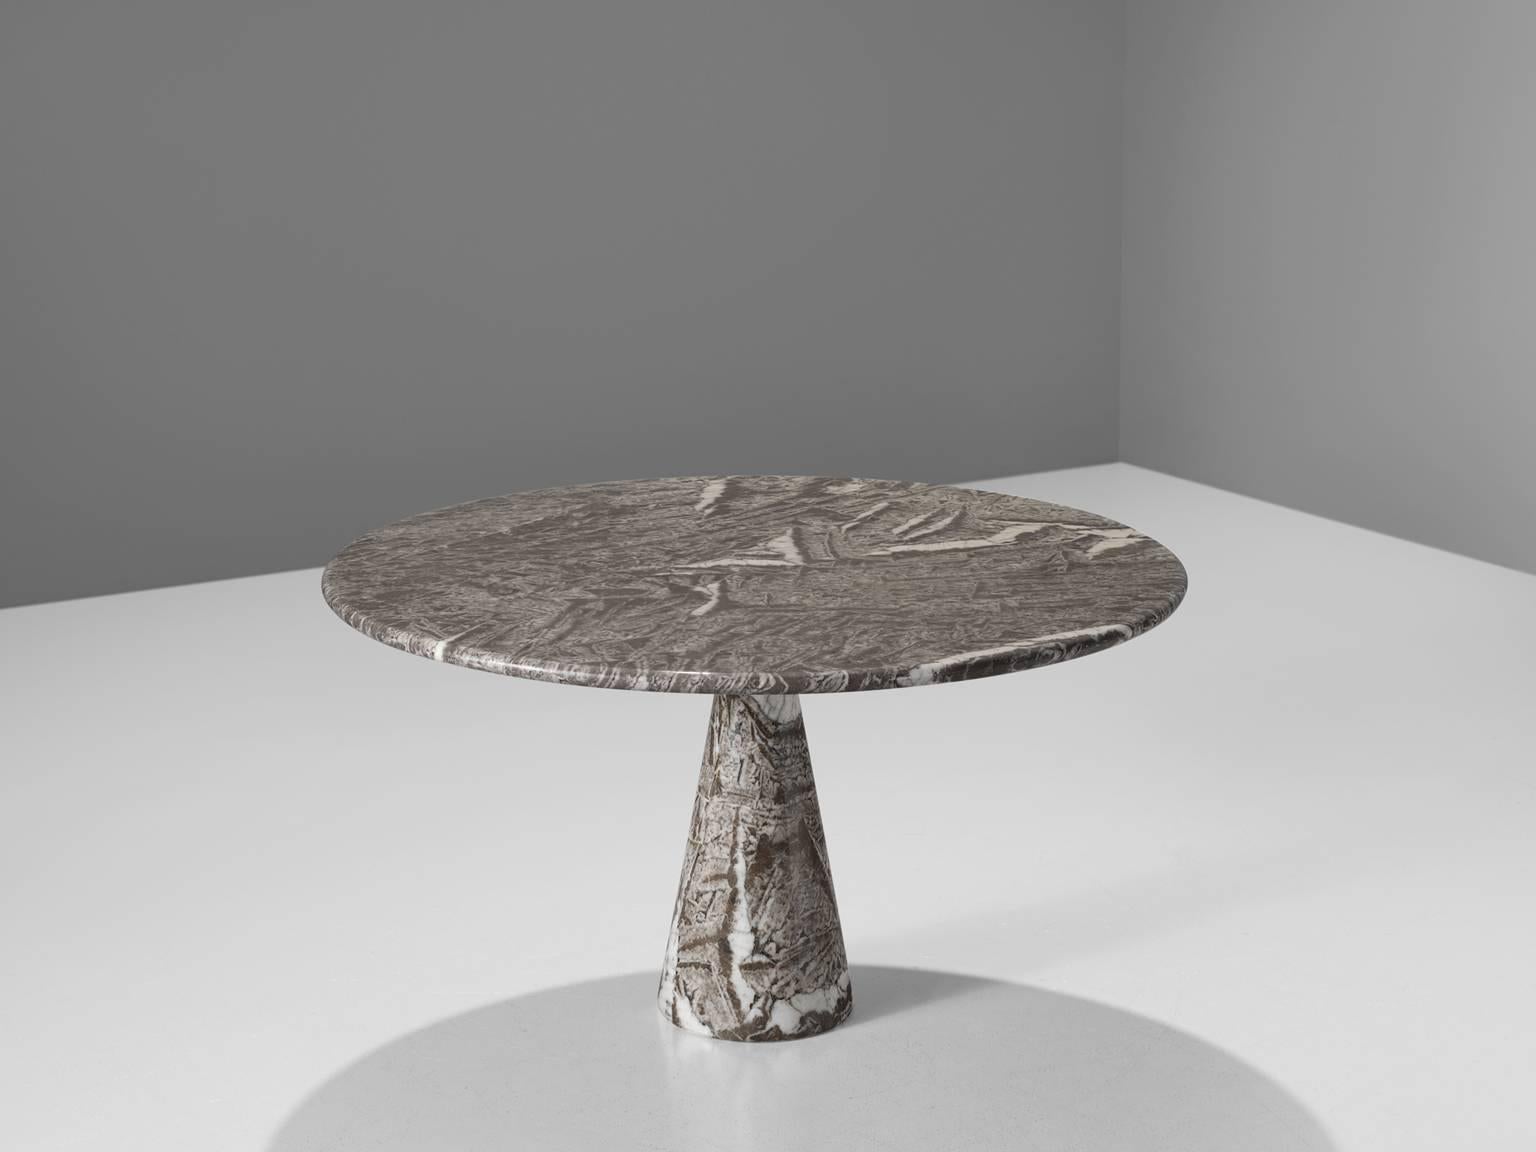 Angelo Mangiarotti for T70, table M1, marble, Italy, 1969

This table is part of the Morentz midcentury collection. The patterned brown to greyish table has a cone shaped base and a circular top. The circular top rests perfectly on the cone. The